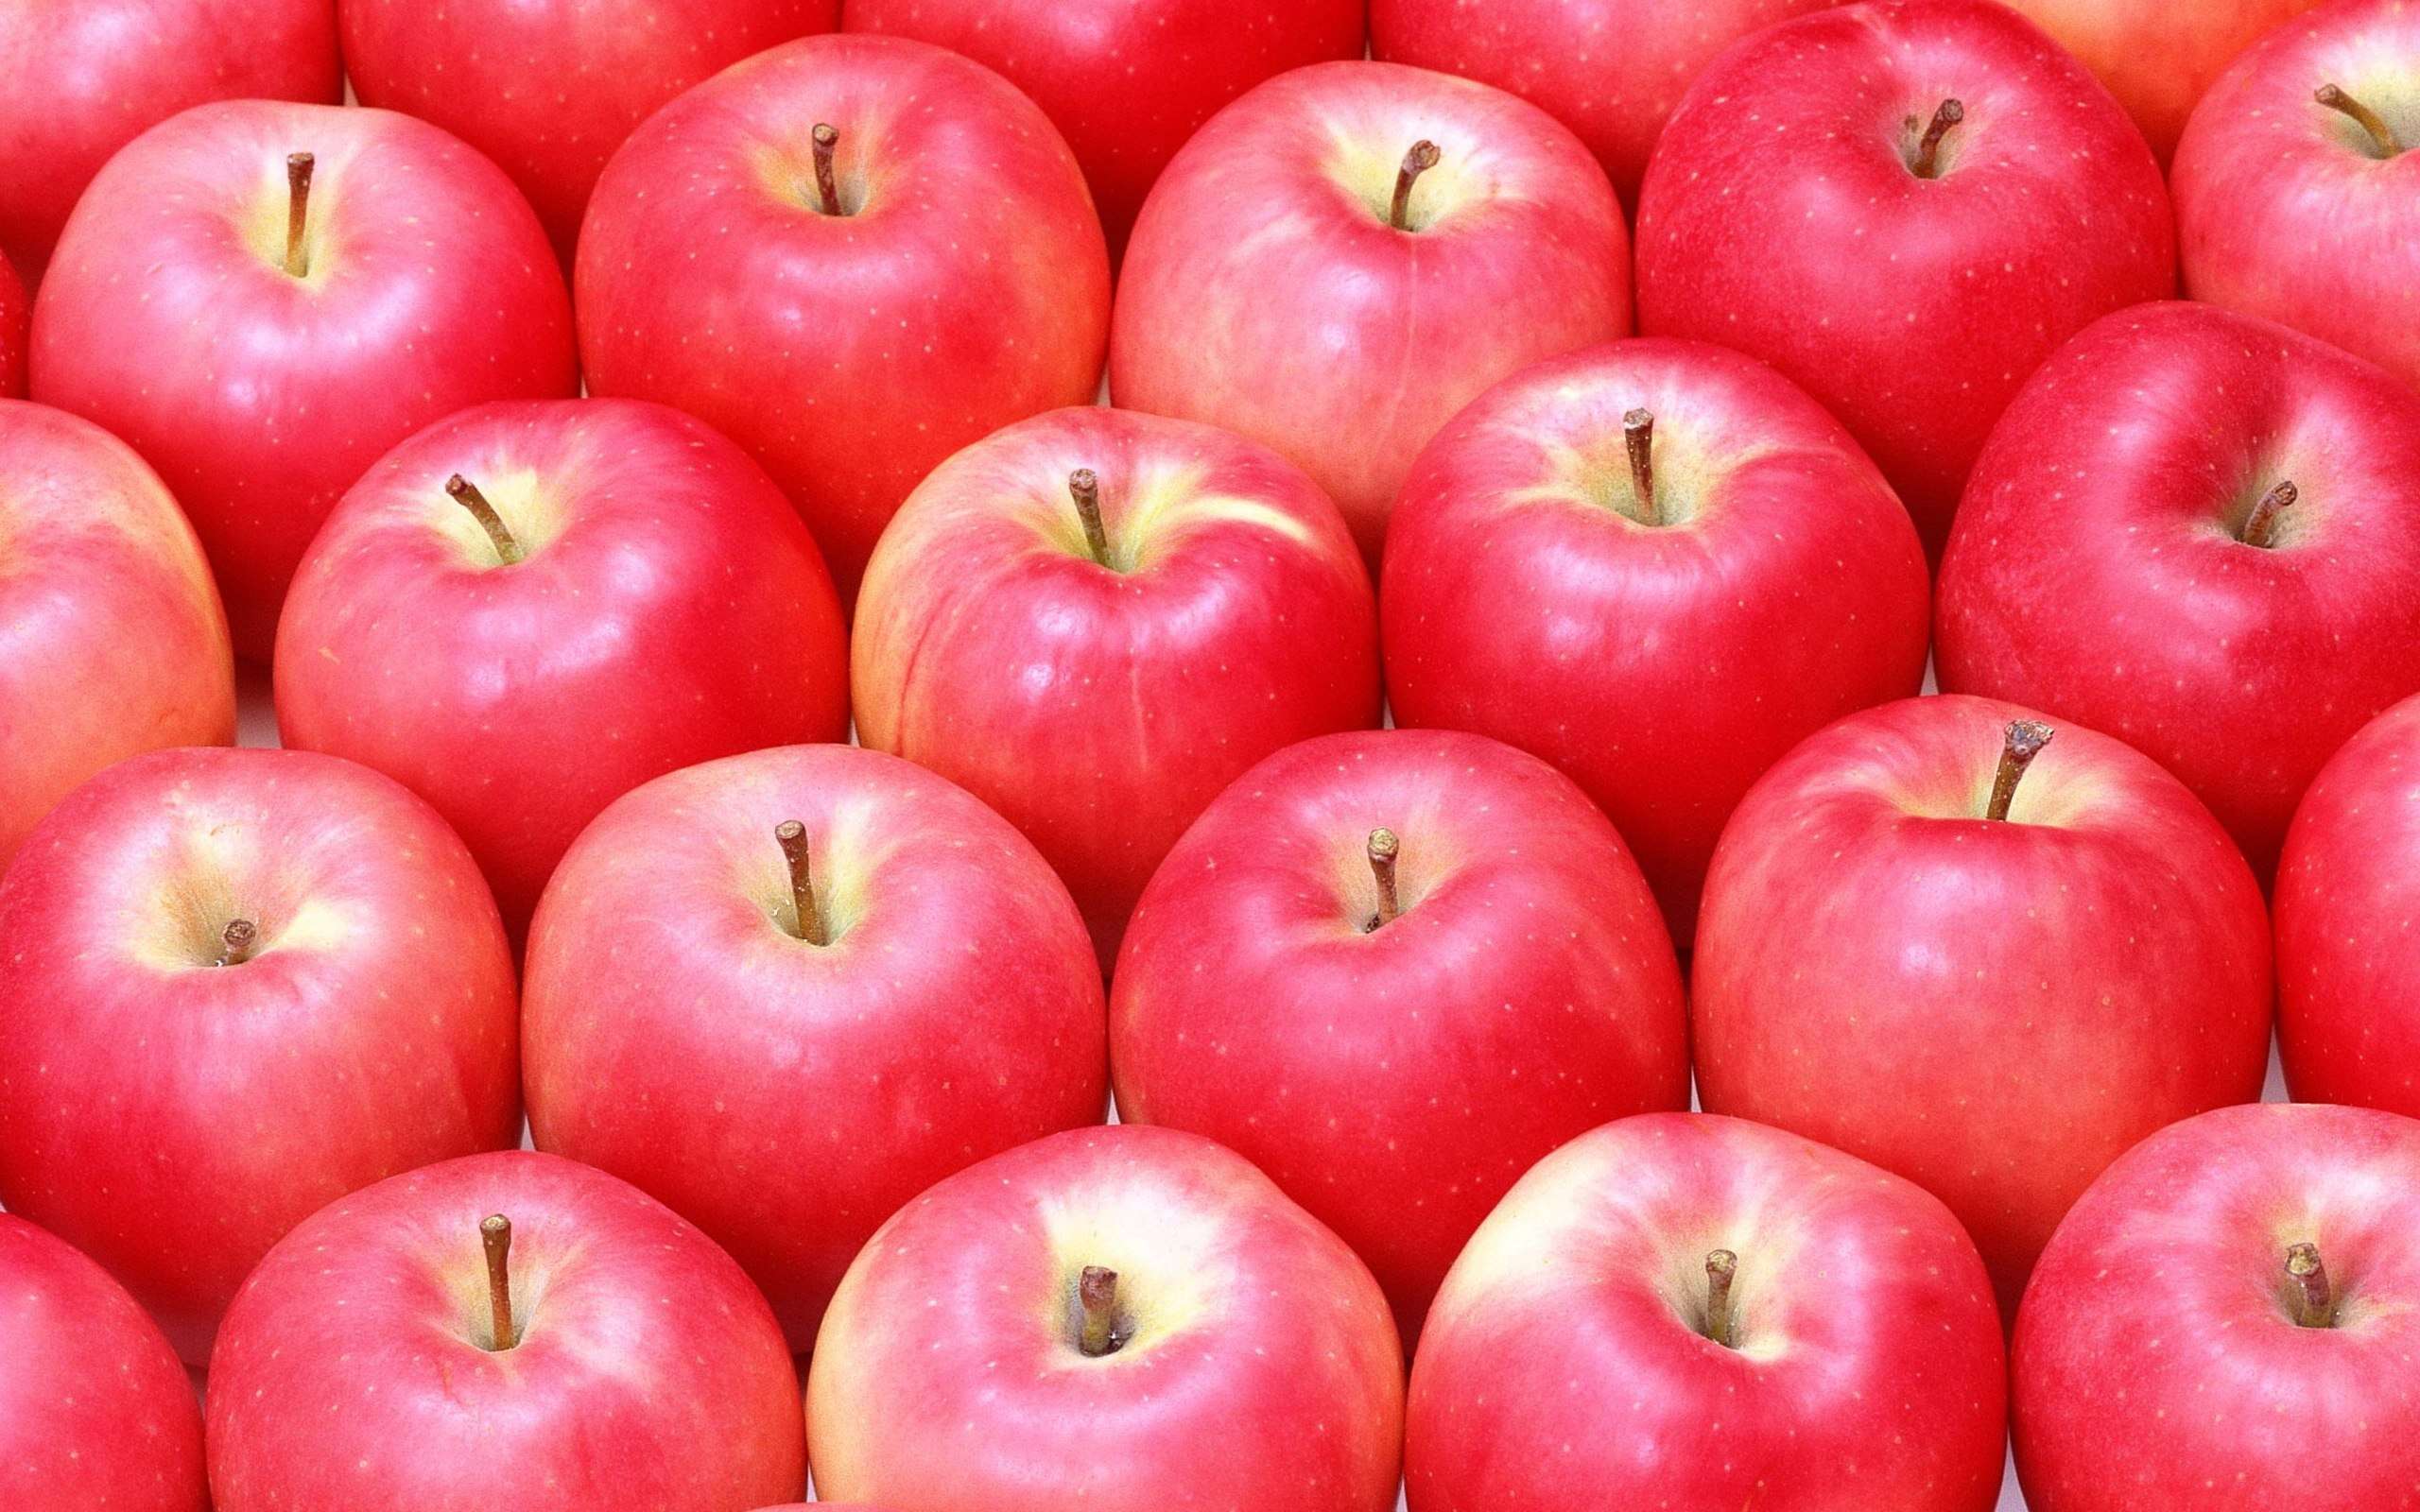 Download Apples Wallpaper 411 2560x1600 px High Resolution ...